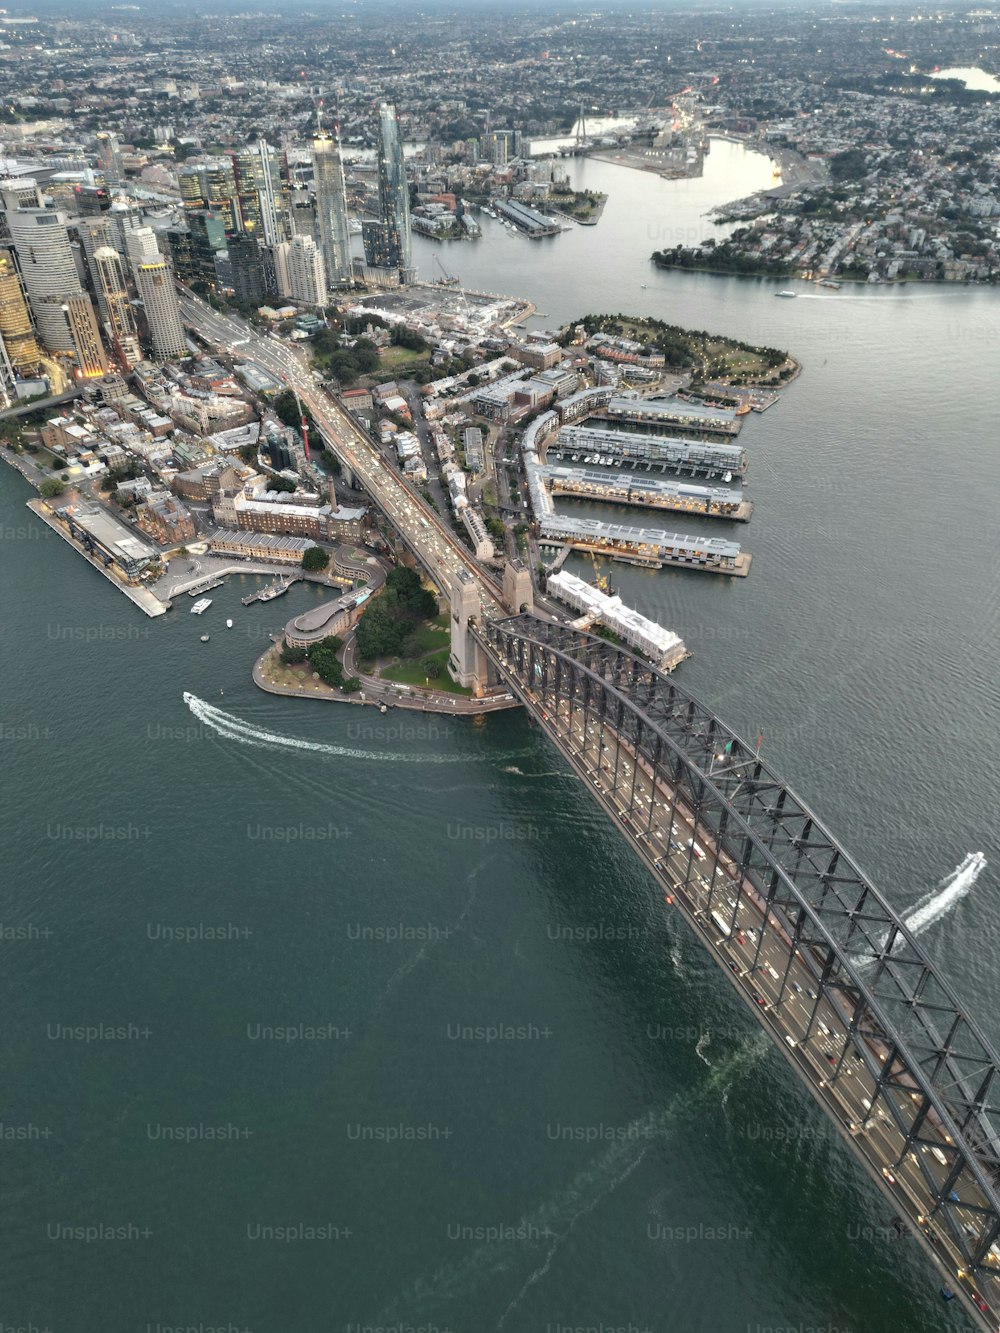 A vertical aerial view of the Sydney harbor bridge and a surrounding cityscape